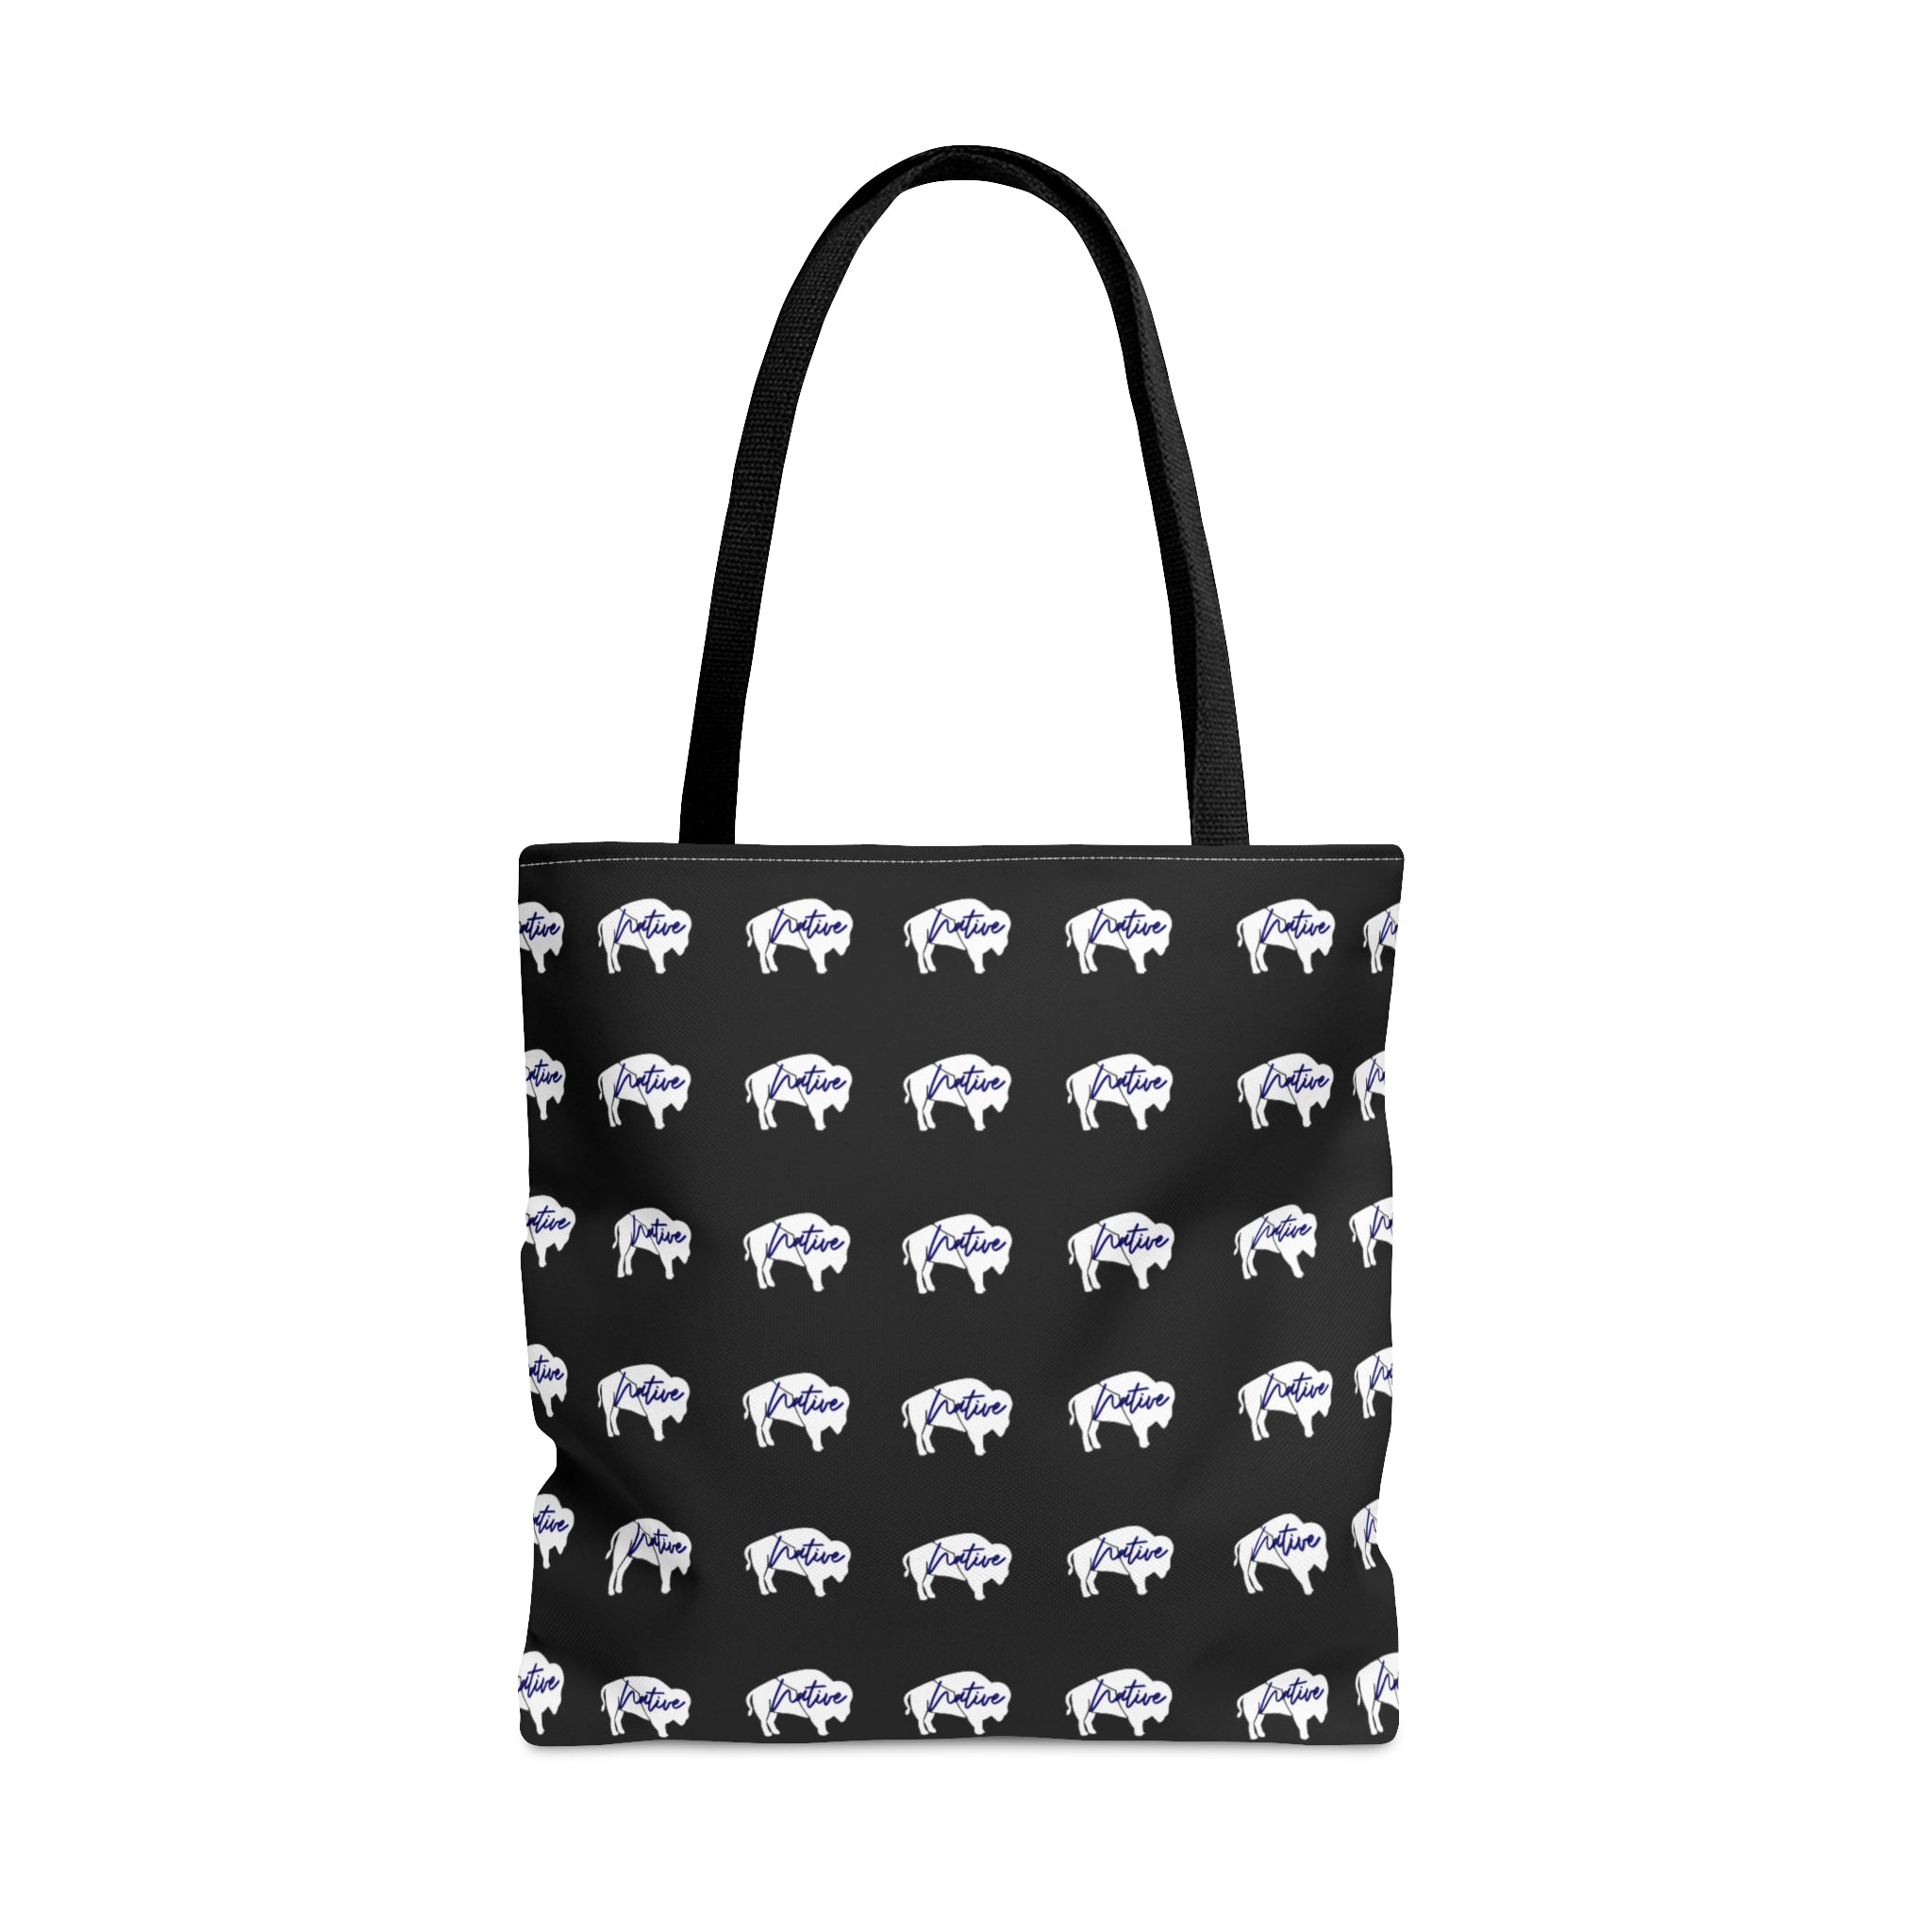 White Innii-Bison with Rainbow Colored Text Tote Bag